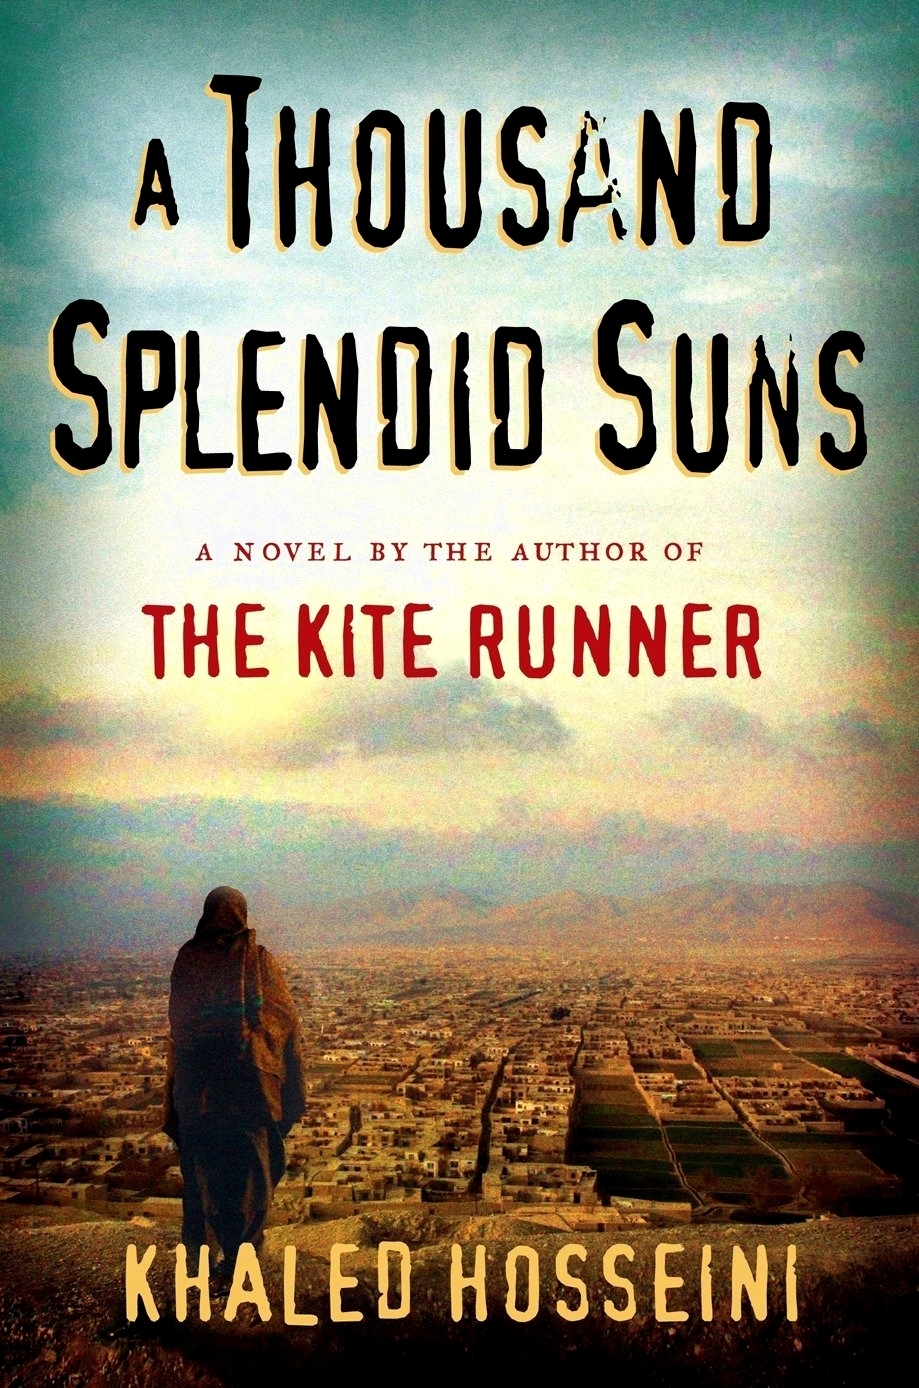 Book cover of &quot;A Thousand Splendid Suns&quot; by Khaled Hosseini, featuring a silhouette of a person walking towards a cityscape